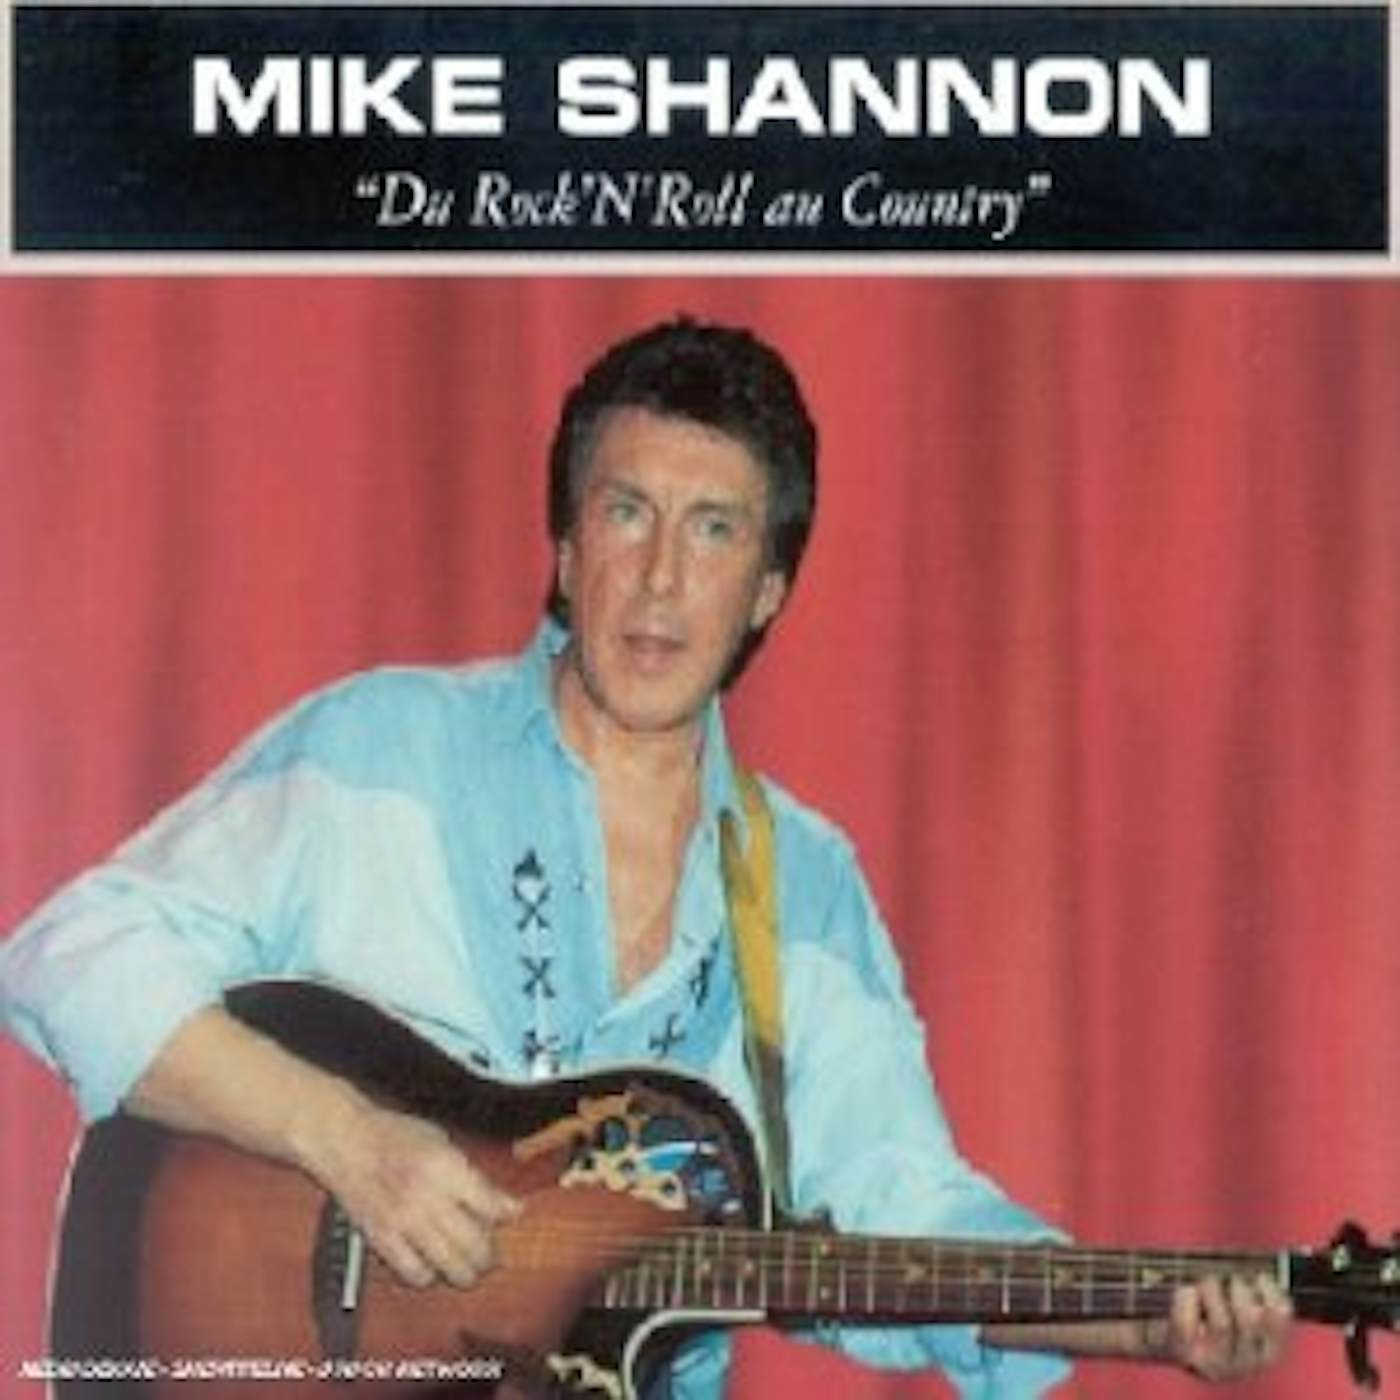 Mike Shannon DU ROCK'N'ROLL AU COUNTRY CD